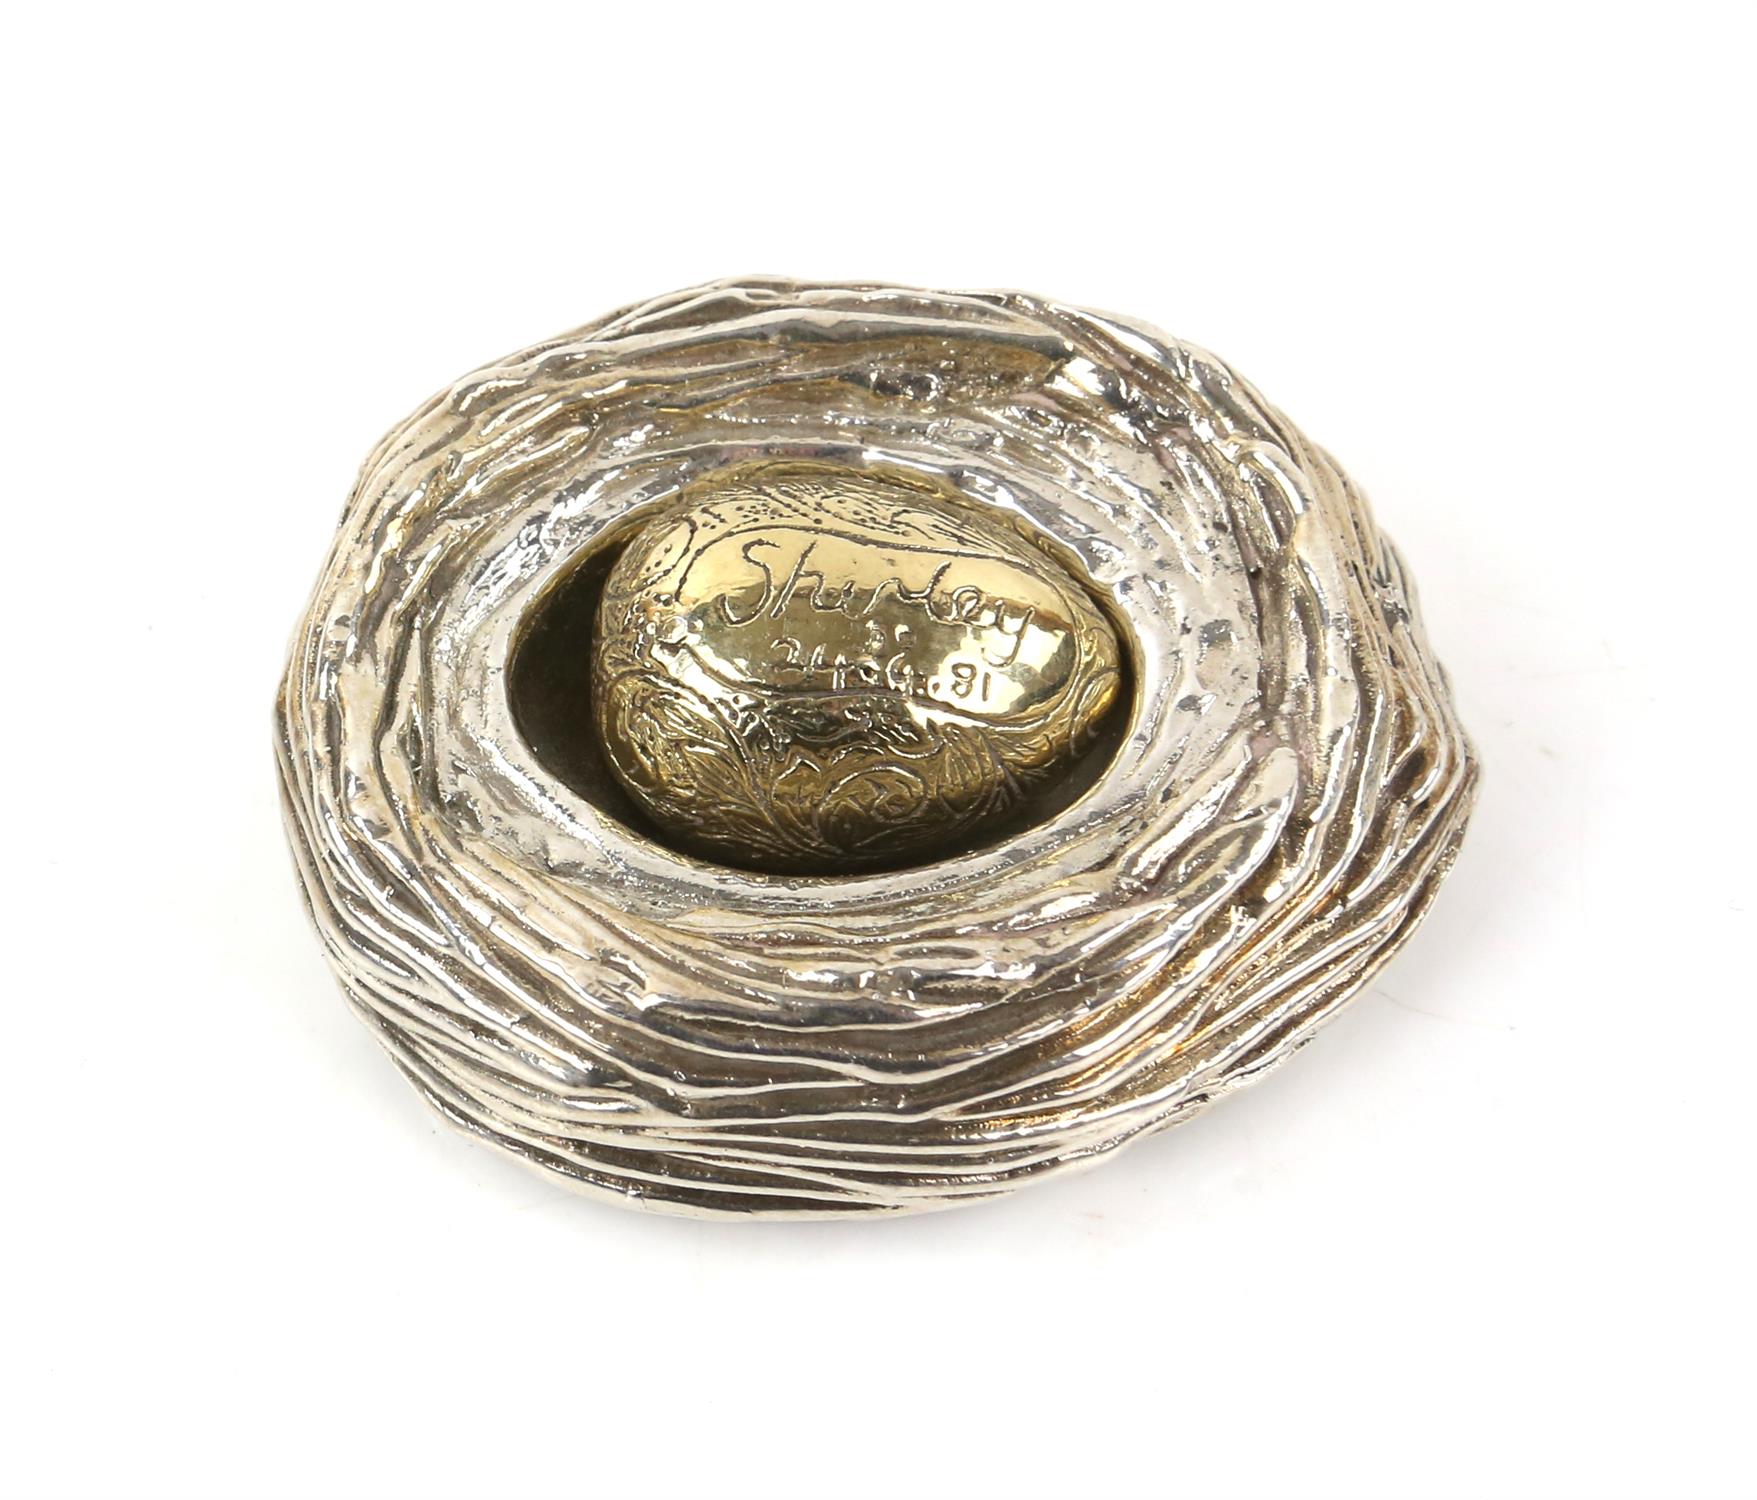 Three piece model of a filled silver chicken with gilt decoration on an egg within a nest by A Ltd, - Image 5 of 5